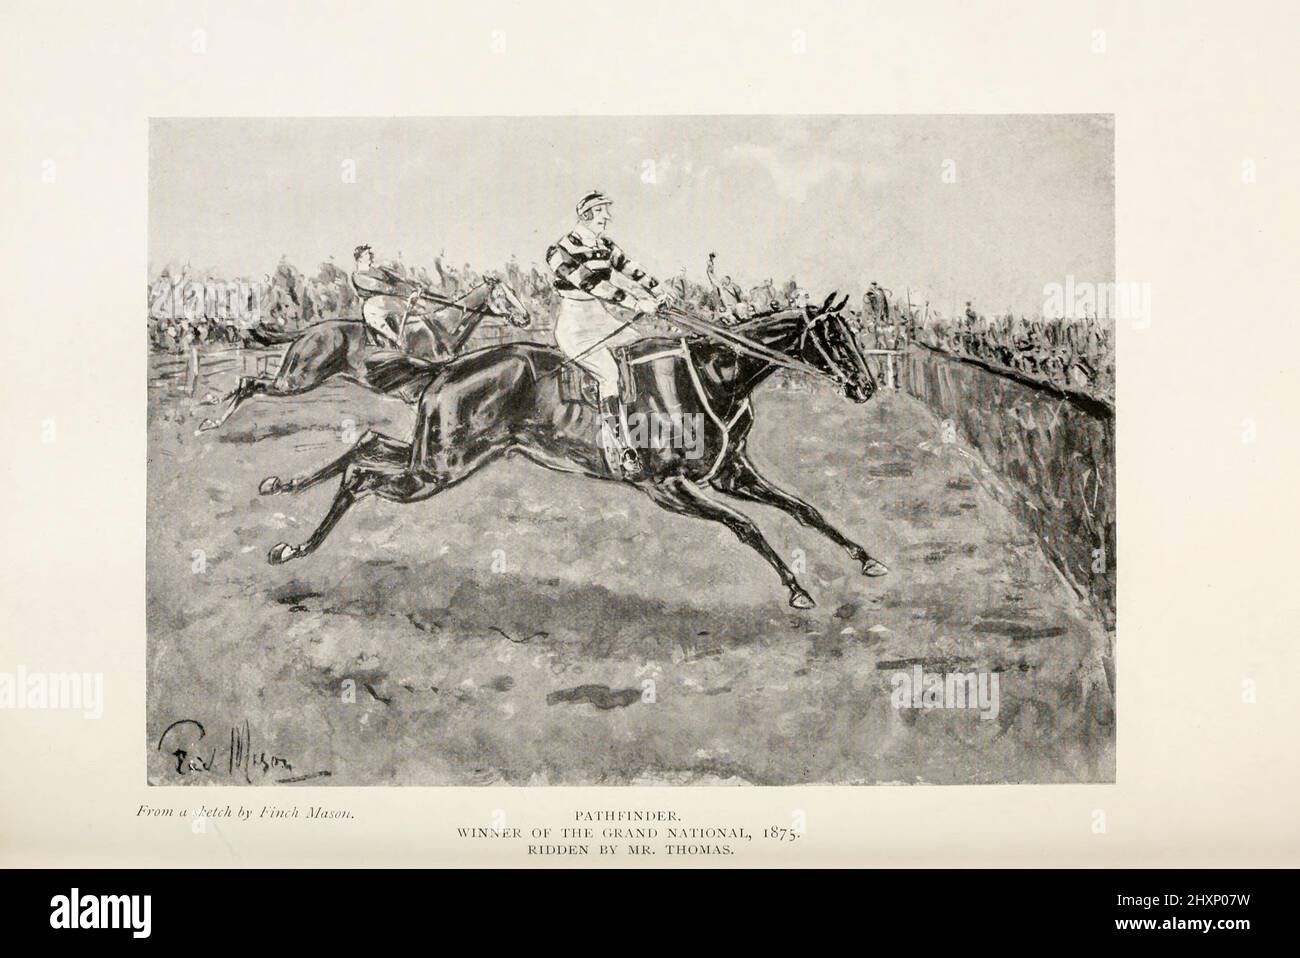 Pathfinder Winner of the Grand National 1875 from the book Heroes and heroines of the Grand National by Finch Mason, A complete Account of Every Race from Its foundation in 1839 to the present year. Publication date 1907 London: : The Biographical Press, 12, Henrietta Street, Covent Garden, W.C. Stock Photo